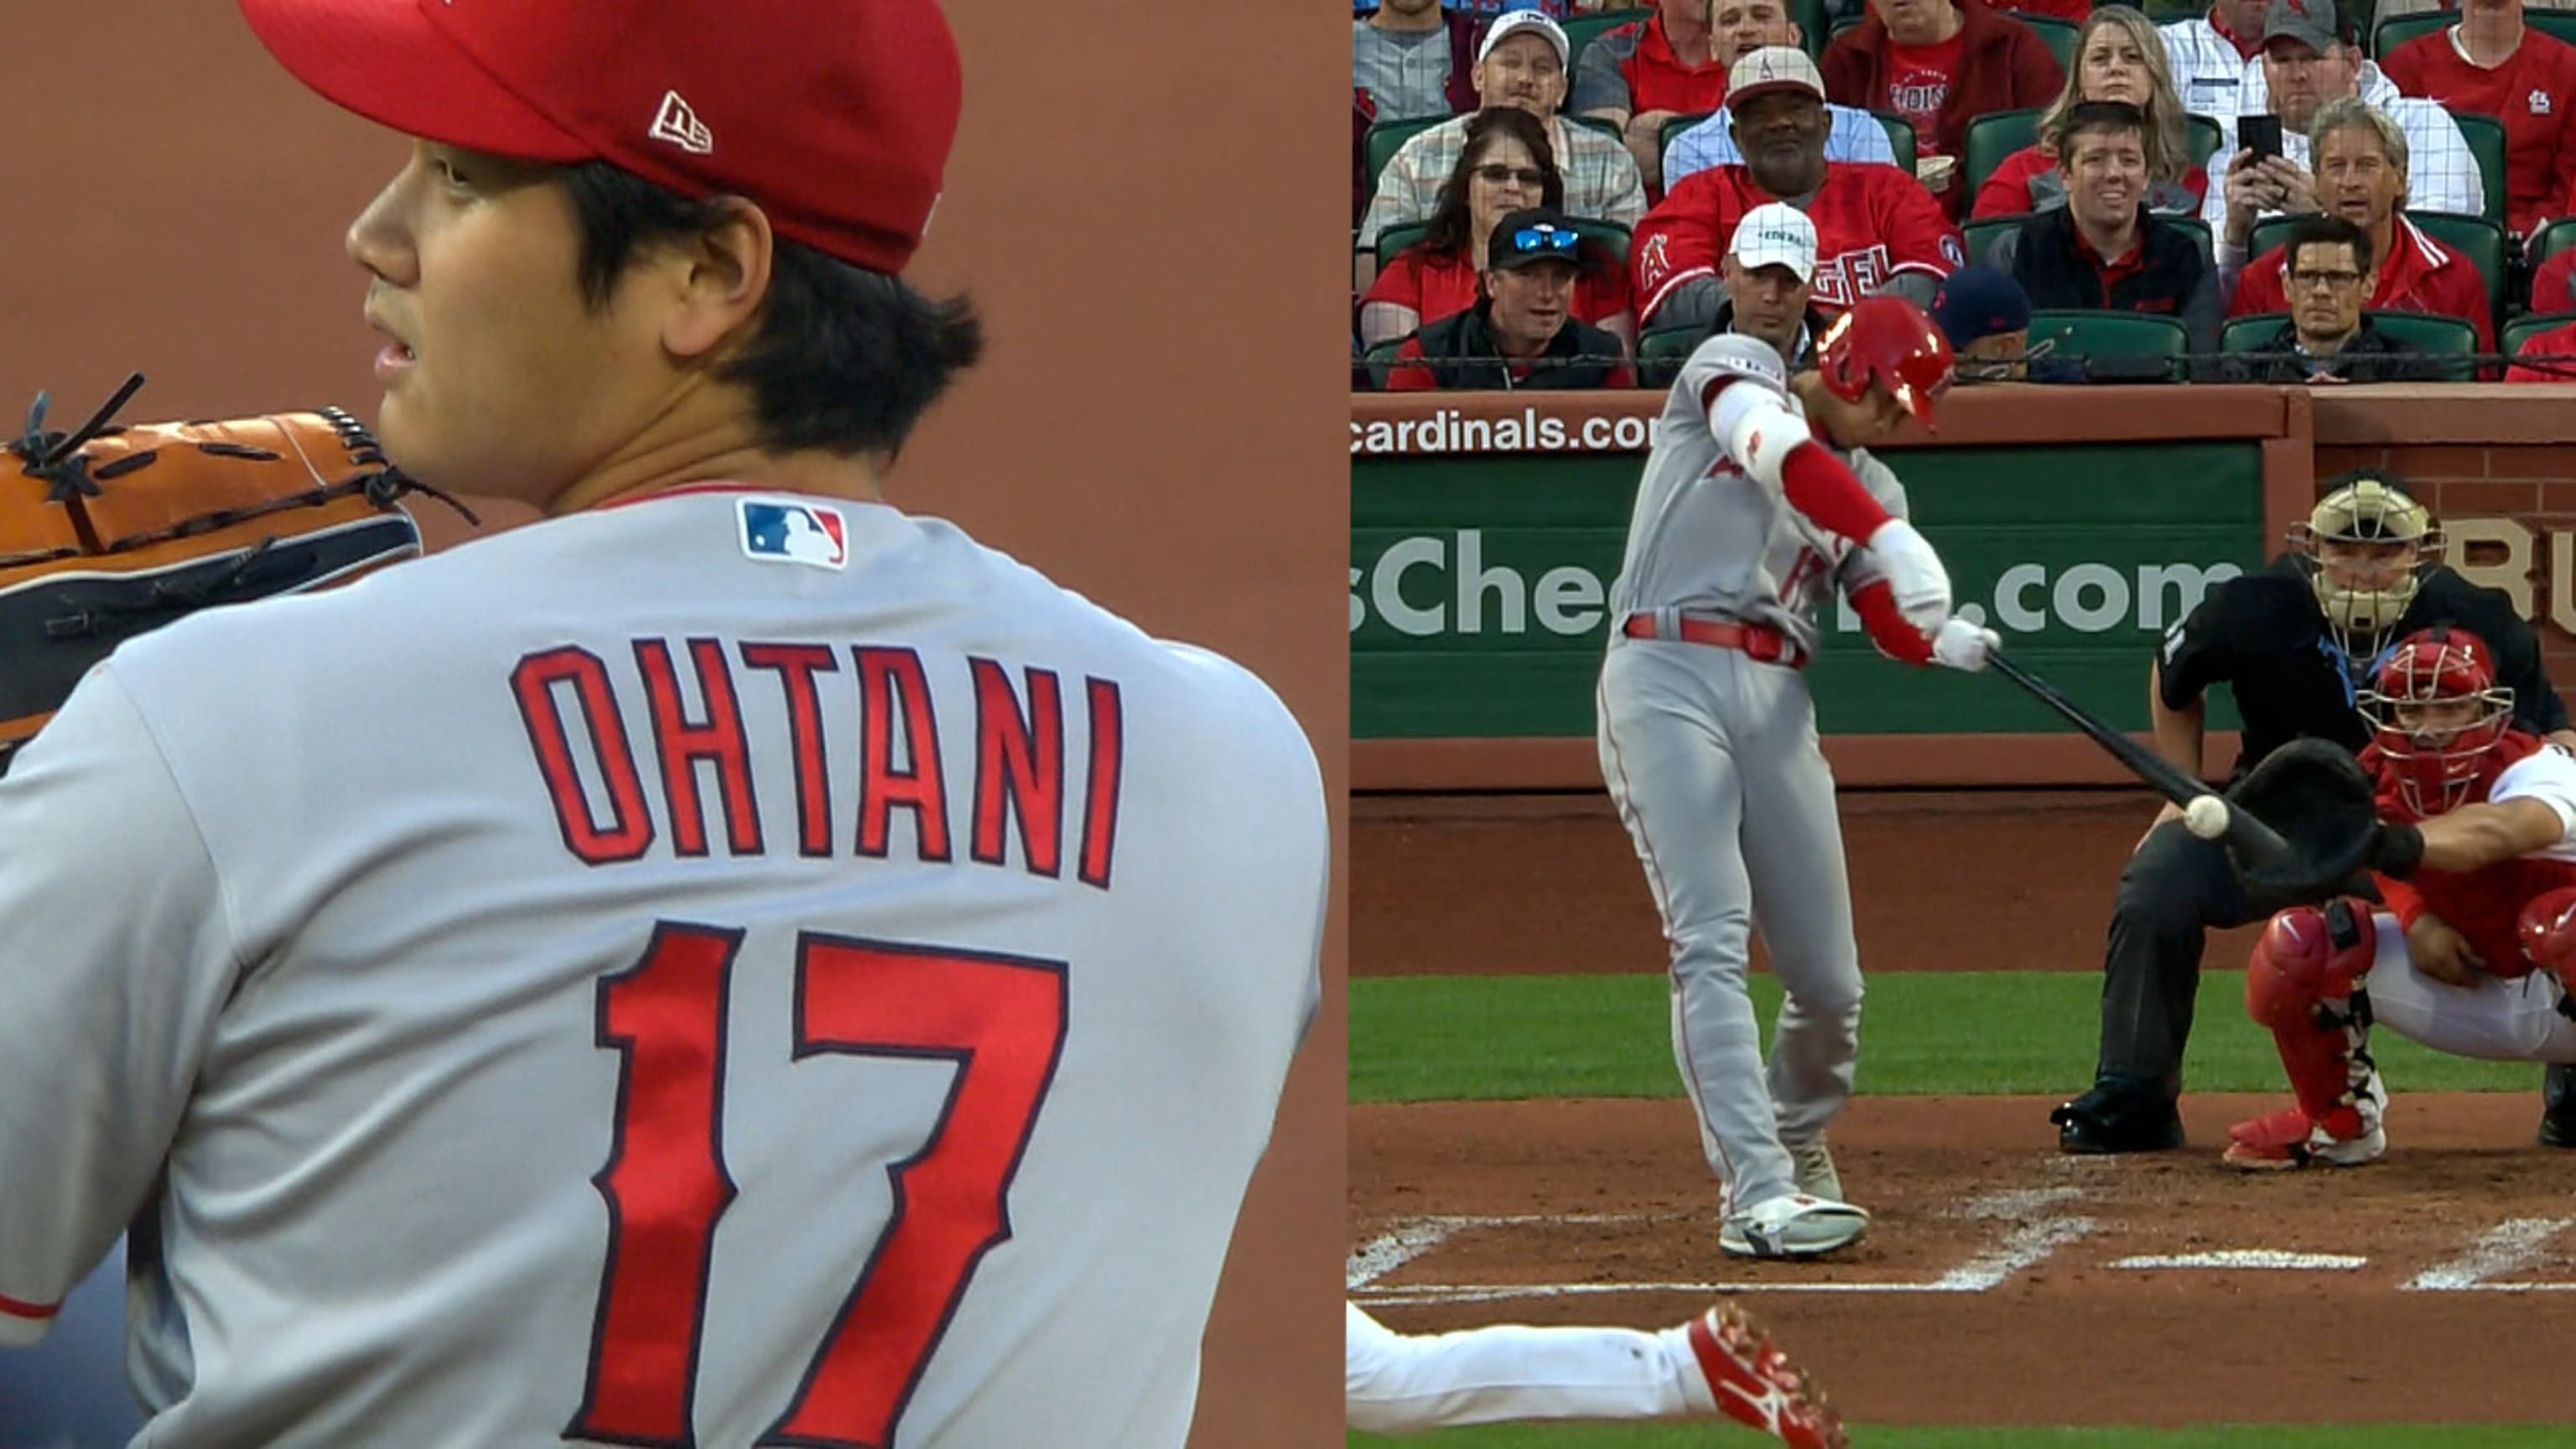 Shohei Ohtani joins Babe Ruth in 500-strikeout, 100-home run club